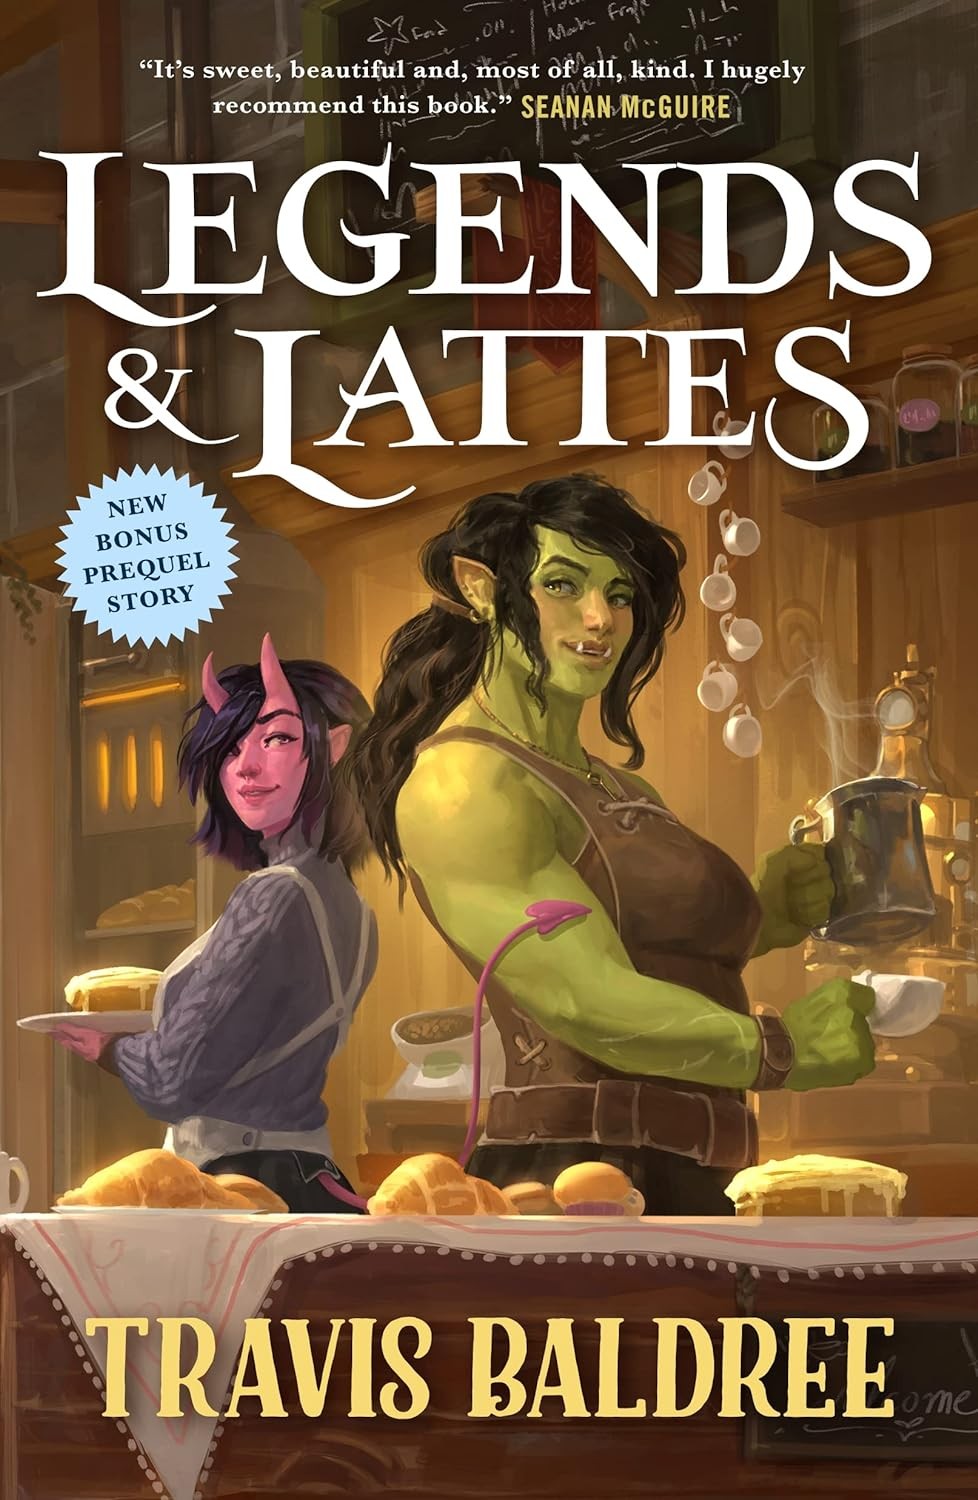 <p>Viv has given up fighting after a life full of bloodshed, and she's swapped her sword for coffee pots when she decides to open the first coffee shop in the city of Thune. She crosses paths with a variety of people, and might just find family along the way.</p><p>"It literally says on the cover, 'low stakes, high cozy vibes,'" Claudia says. "Well that about sums you up!" Hannah chimes in.</p><p>"Low stakes, real quiet, cozy vibes," Claudia continues. "Really comforting, it was like a big hug."</p><p><em>Legends & Lattes has a 4.6 on Amazon and <span>4.1 </span></em><span><em>on Goodreads, both out of 5.</em></span></p>